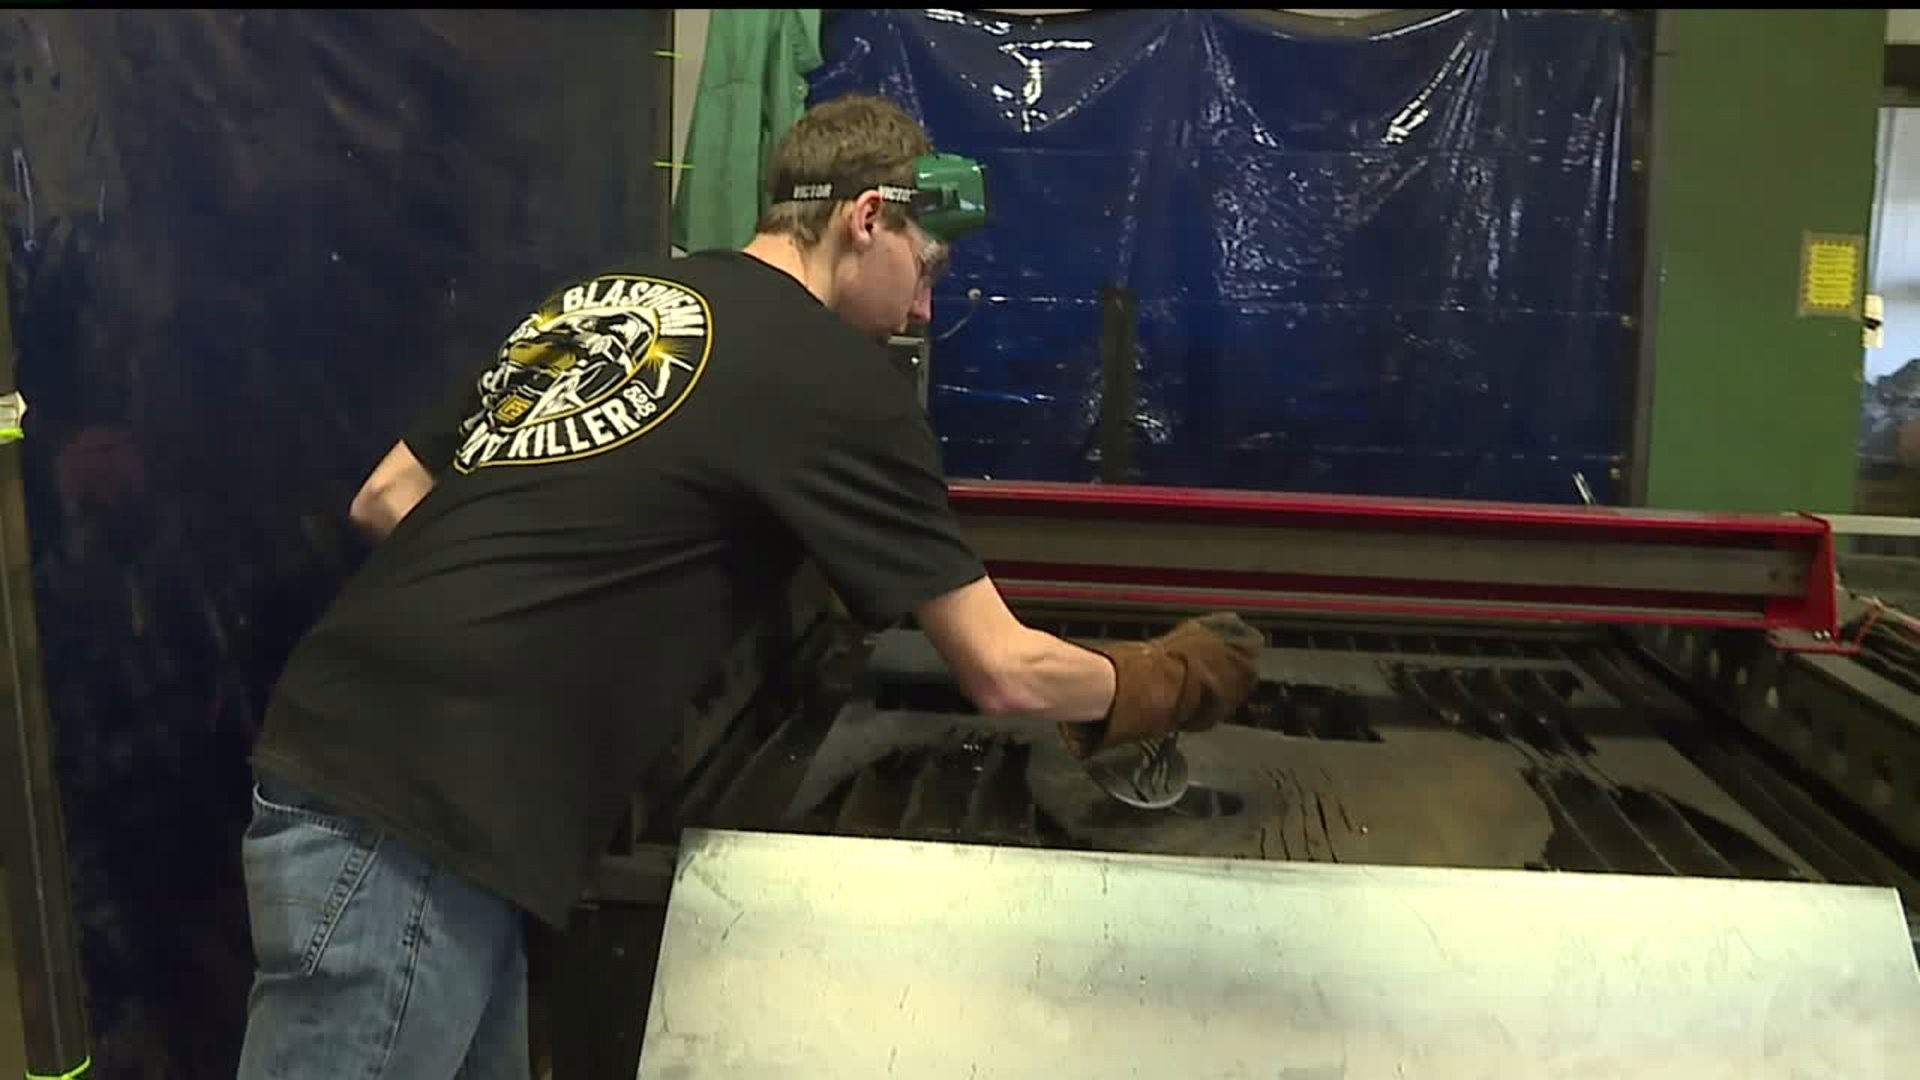 North Scott prepares students for the future with a welding class